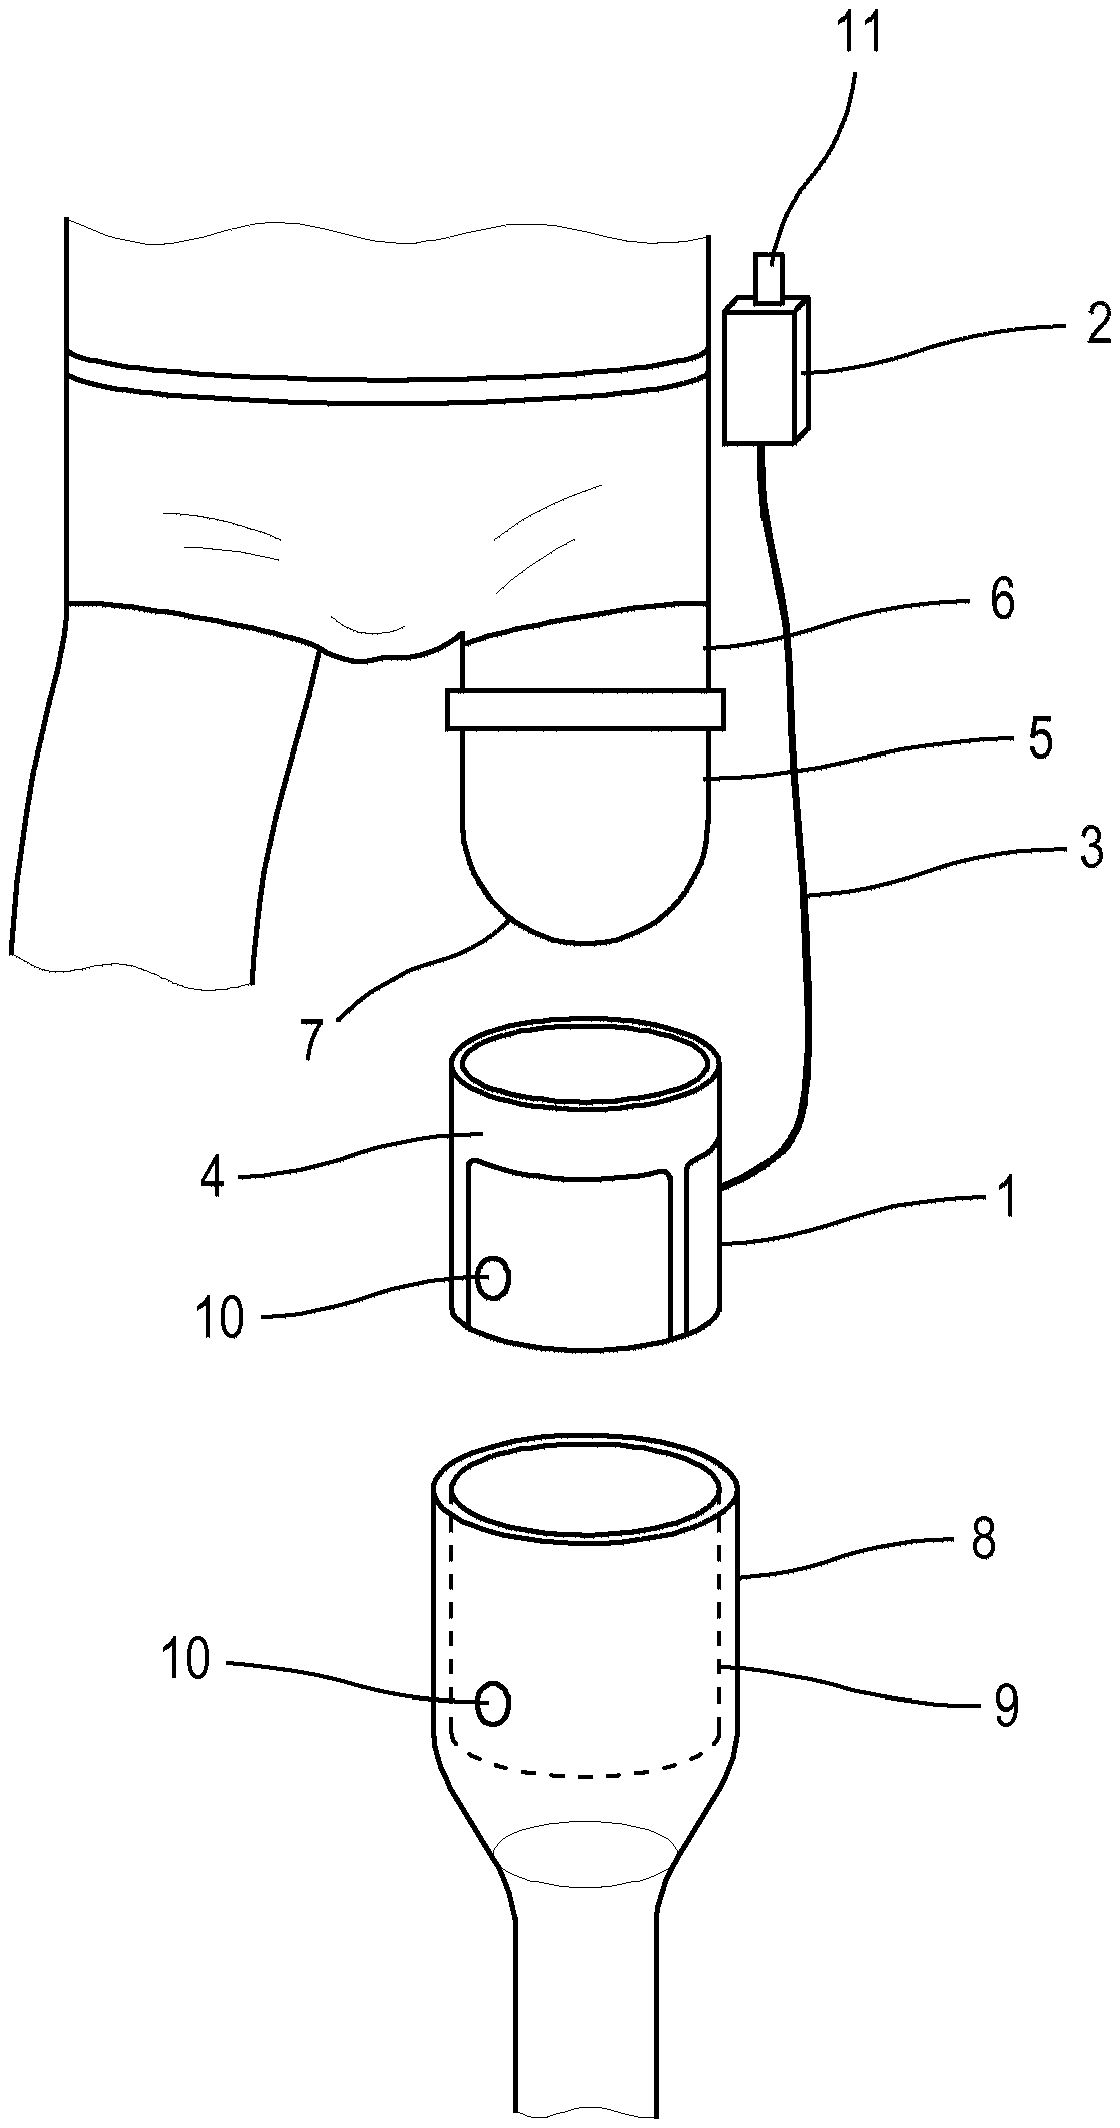 Device and method for the heating and/or temperature control of prosthesis sockets